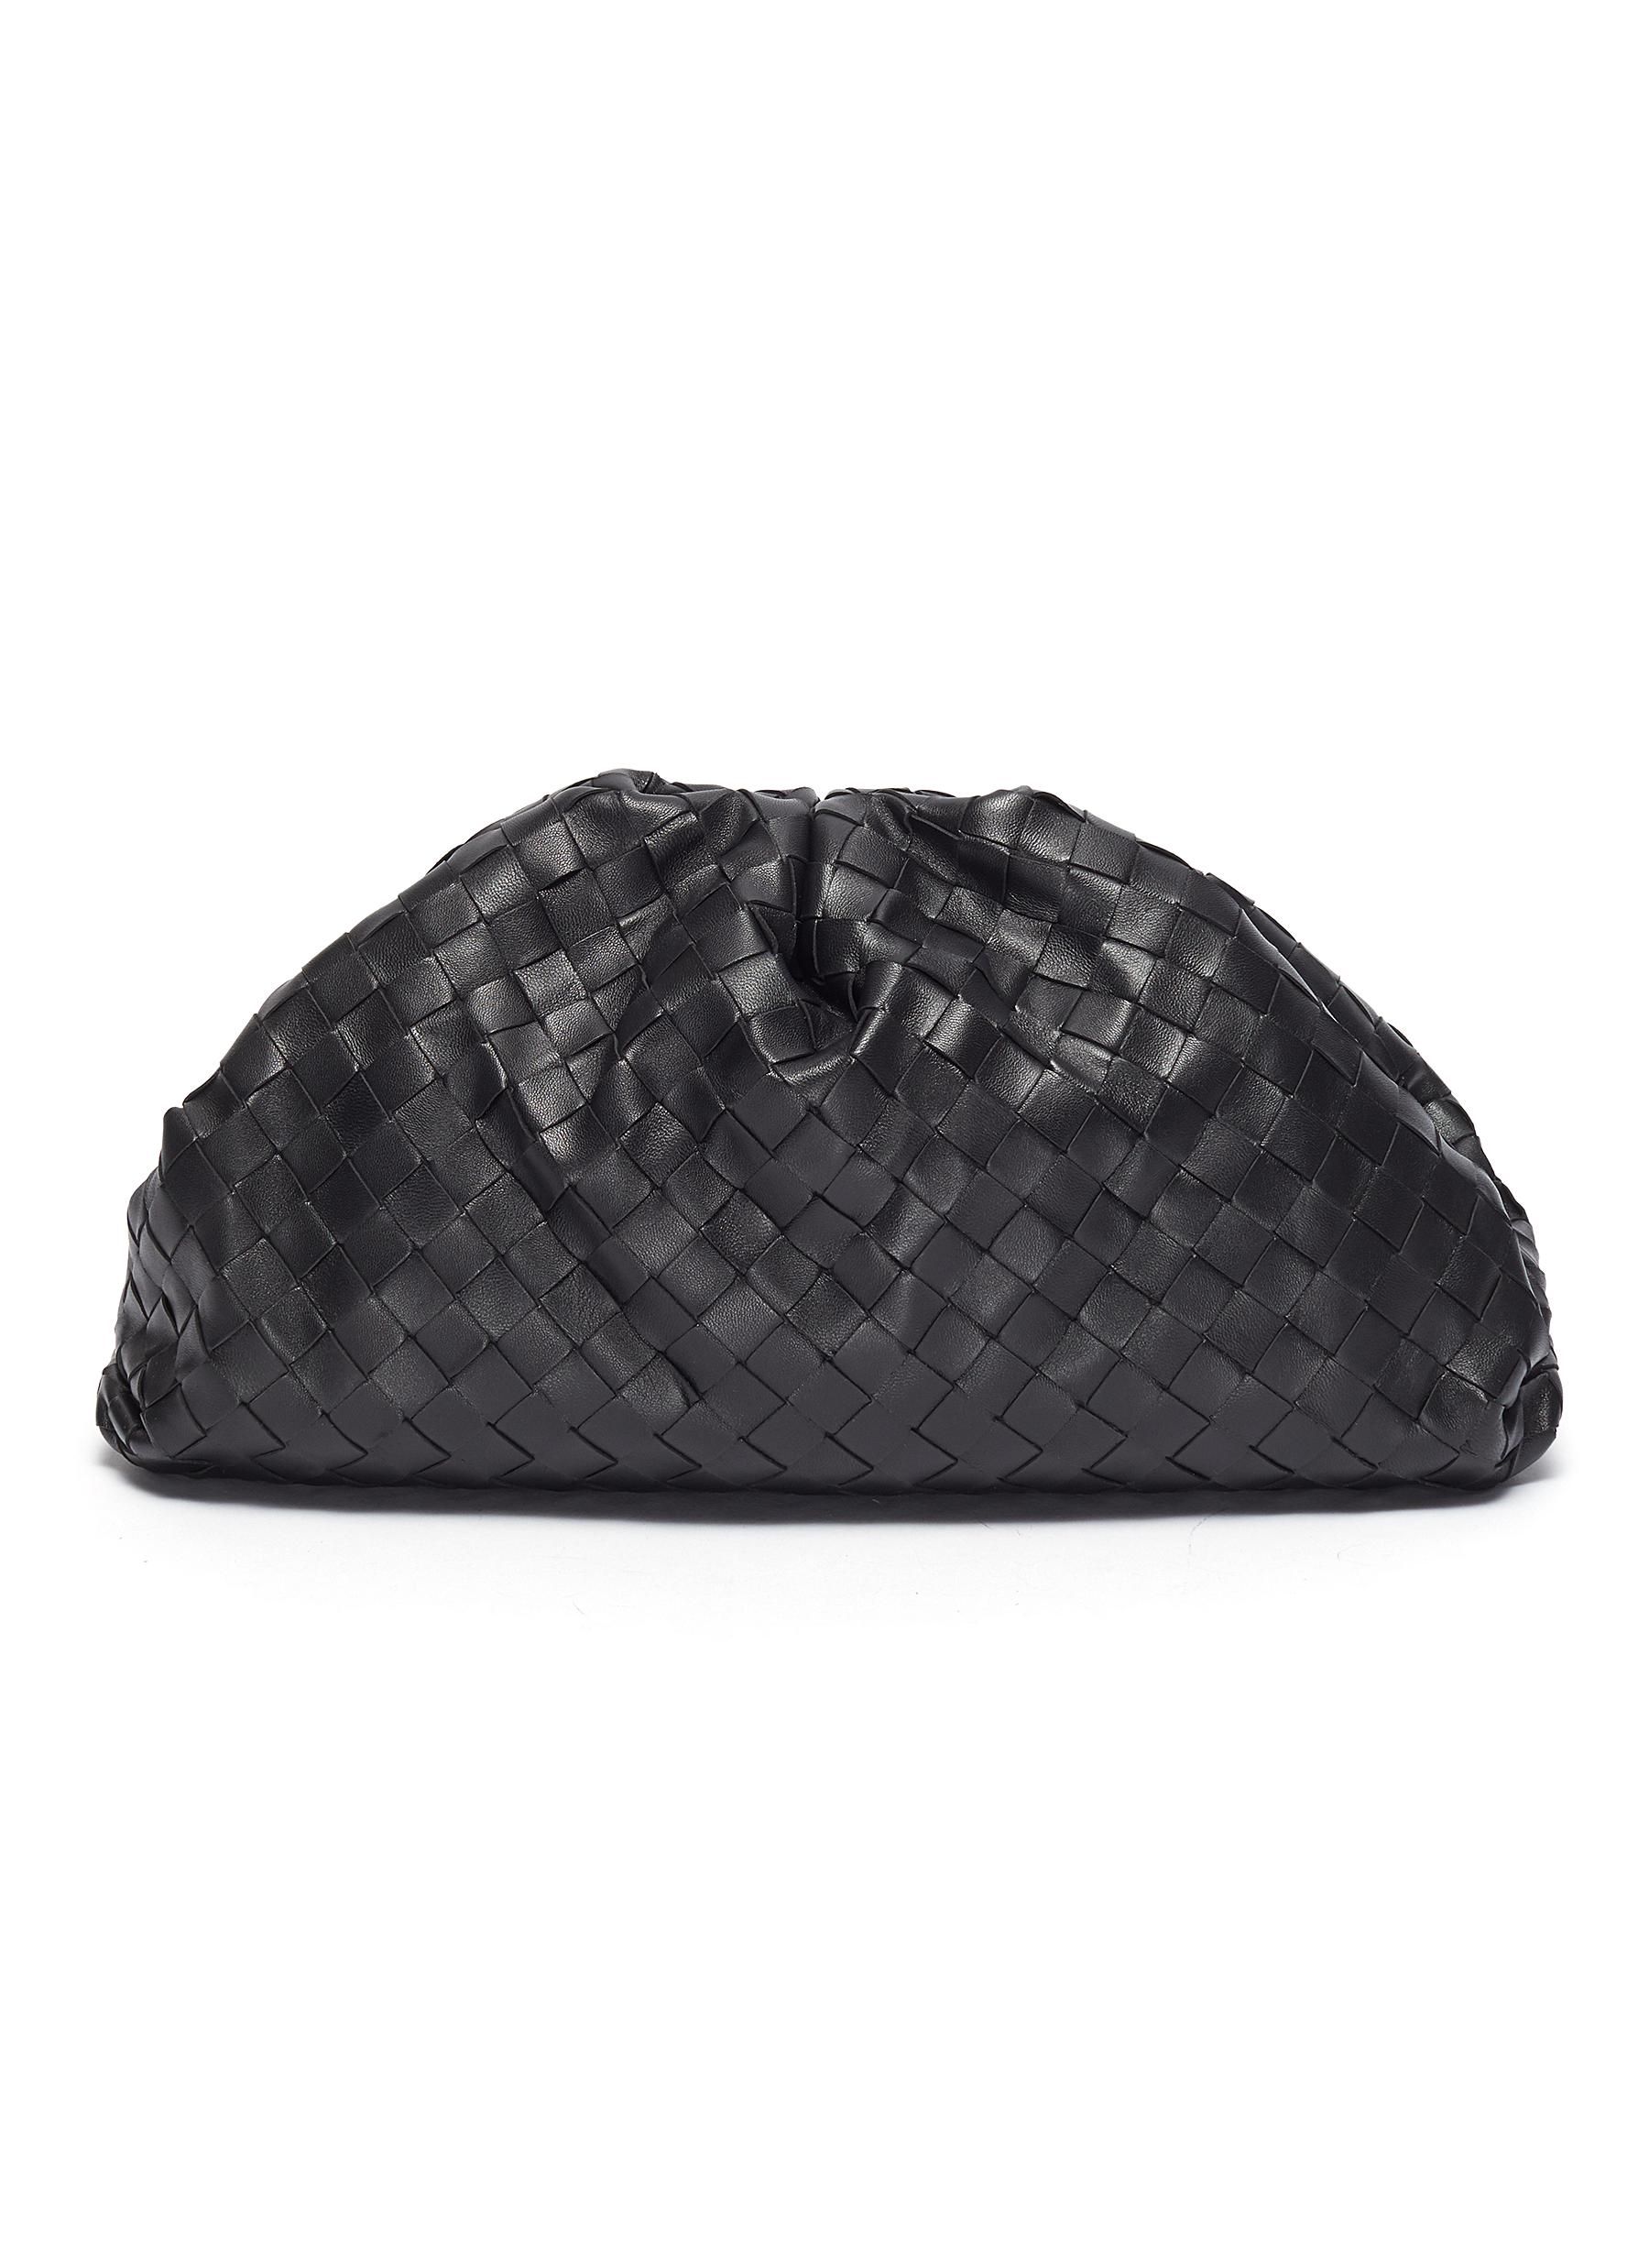 ’THE POUCH’ WOVEN LEATHER CLUTCH